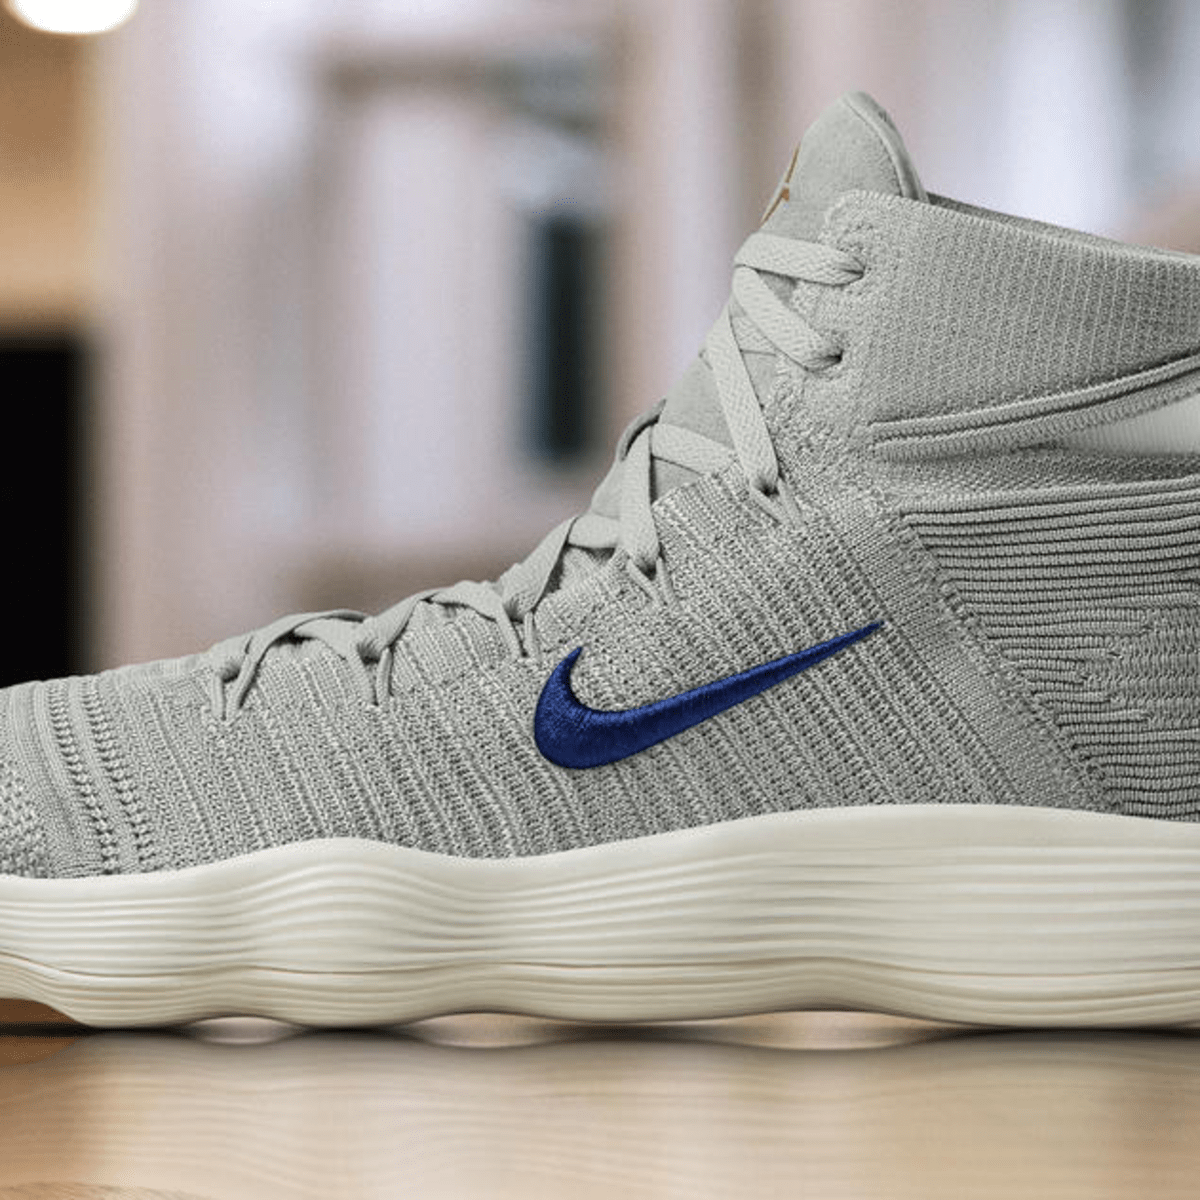 Aplastar fatiga Hacer Photos: Draymond Green To Debut New Nike React Hyperdunk 2017 Flyknit  Sneakers In Game 1 Tonight - The Spun: What's Trending In The Sports World  Today